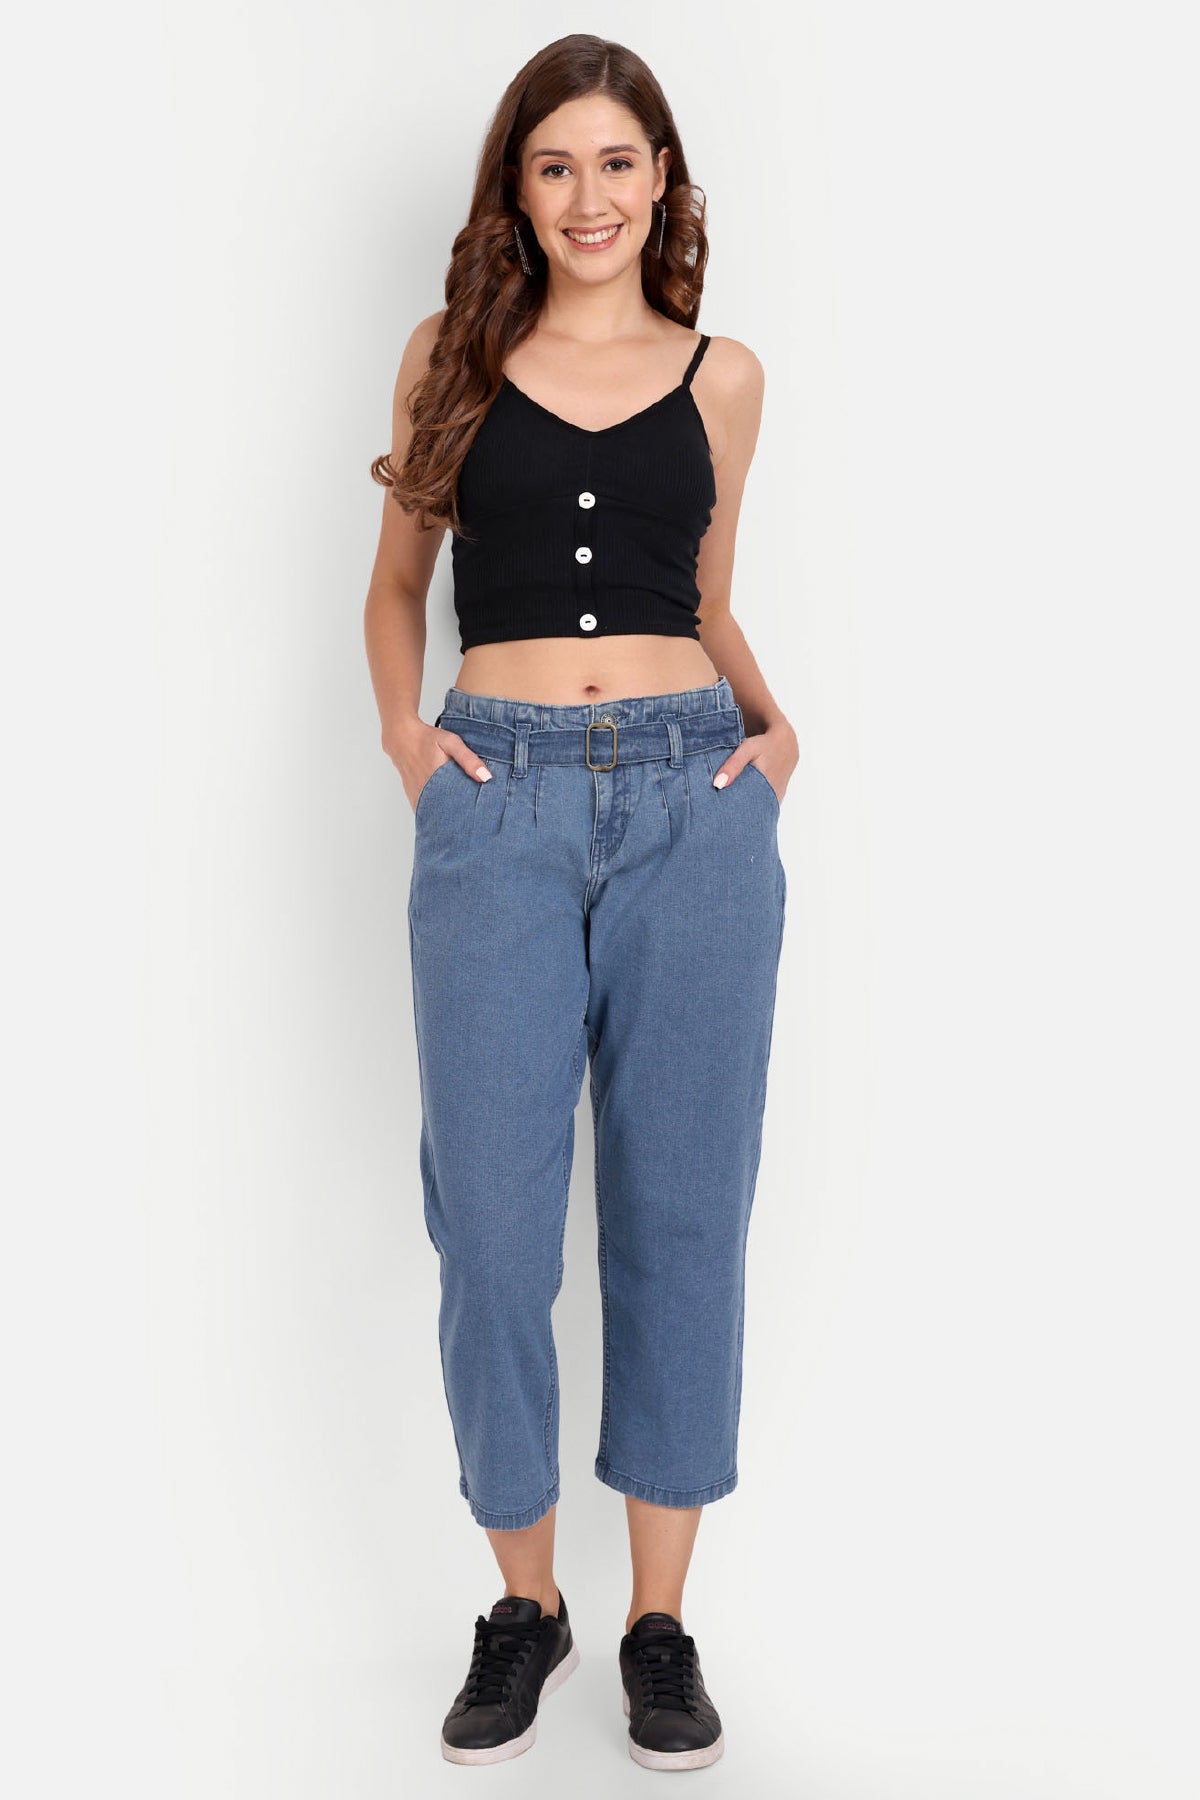 Buy FOREVER 21 Women Blue Solid Denim Culottes - Trousers for Women 4330693  | Myntra